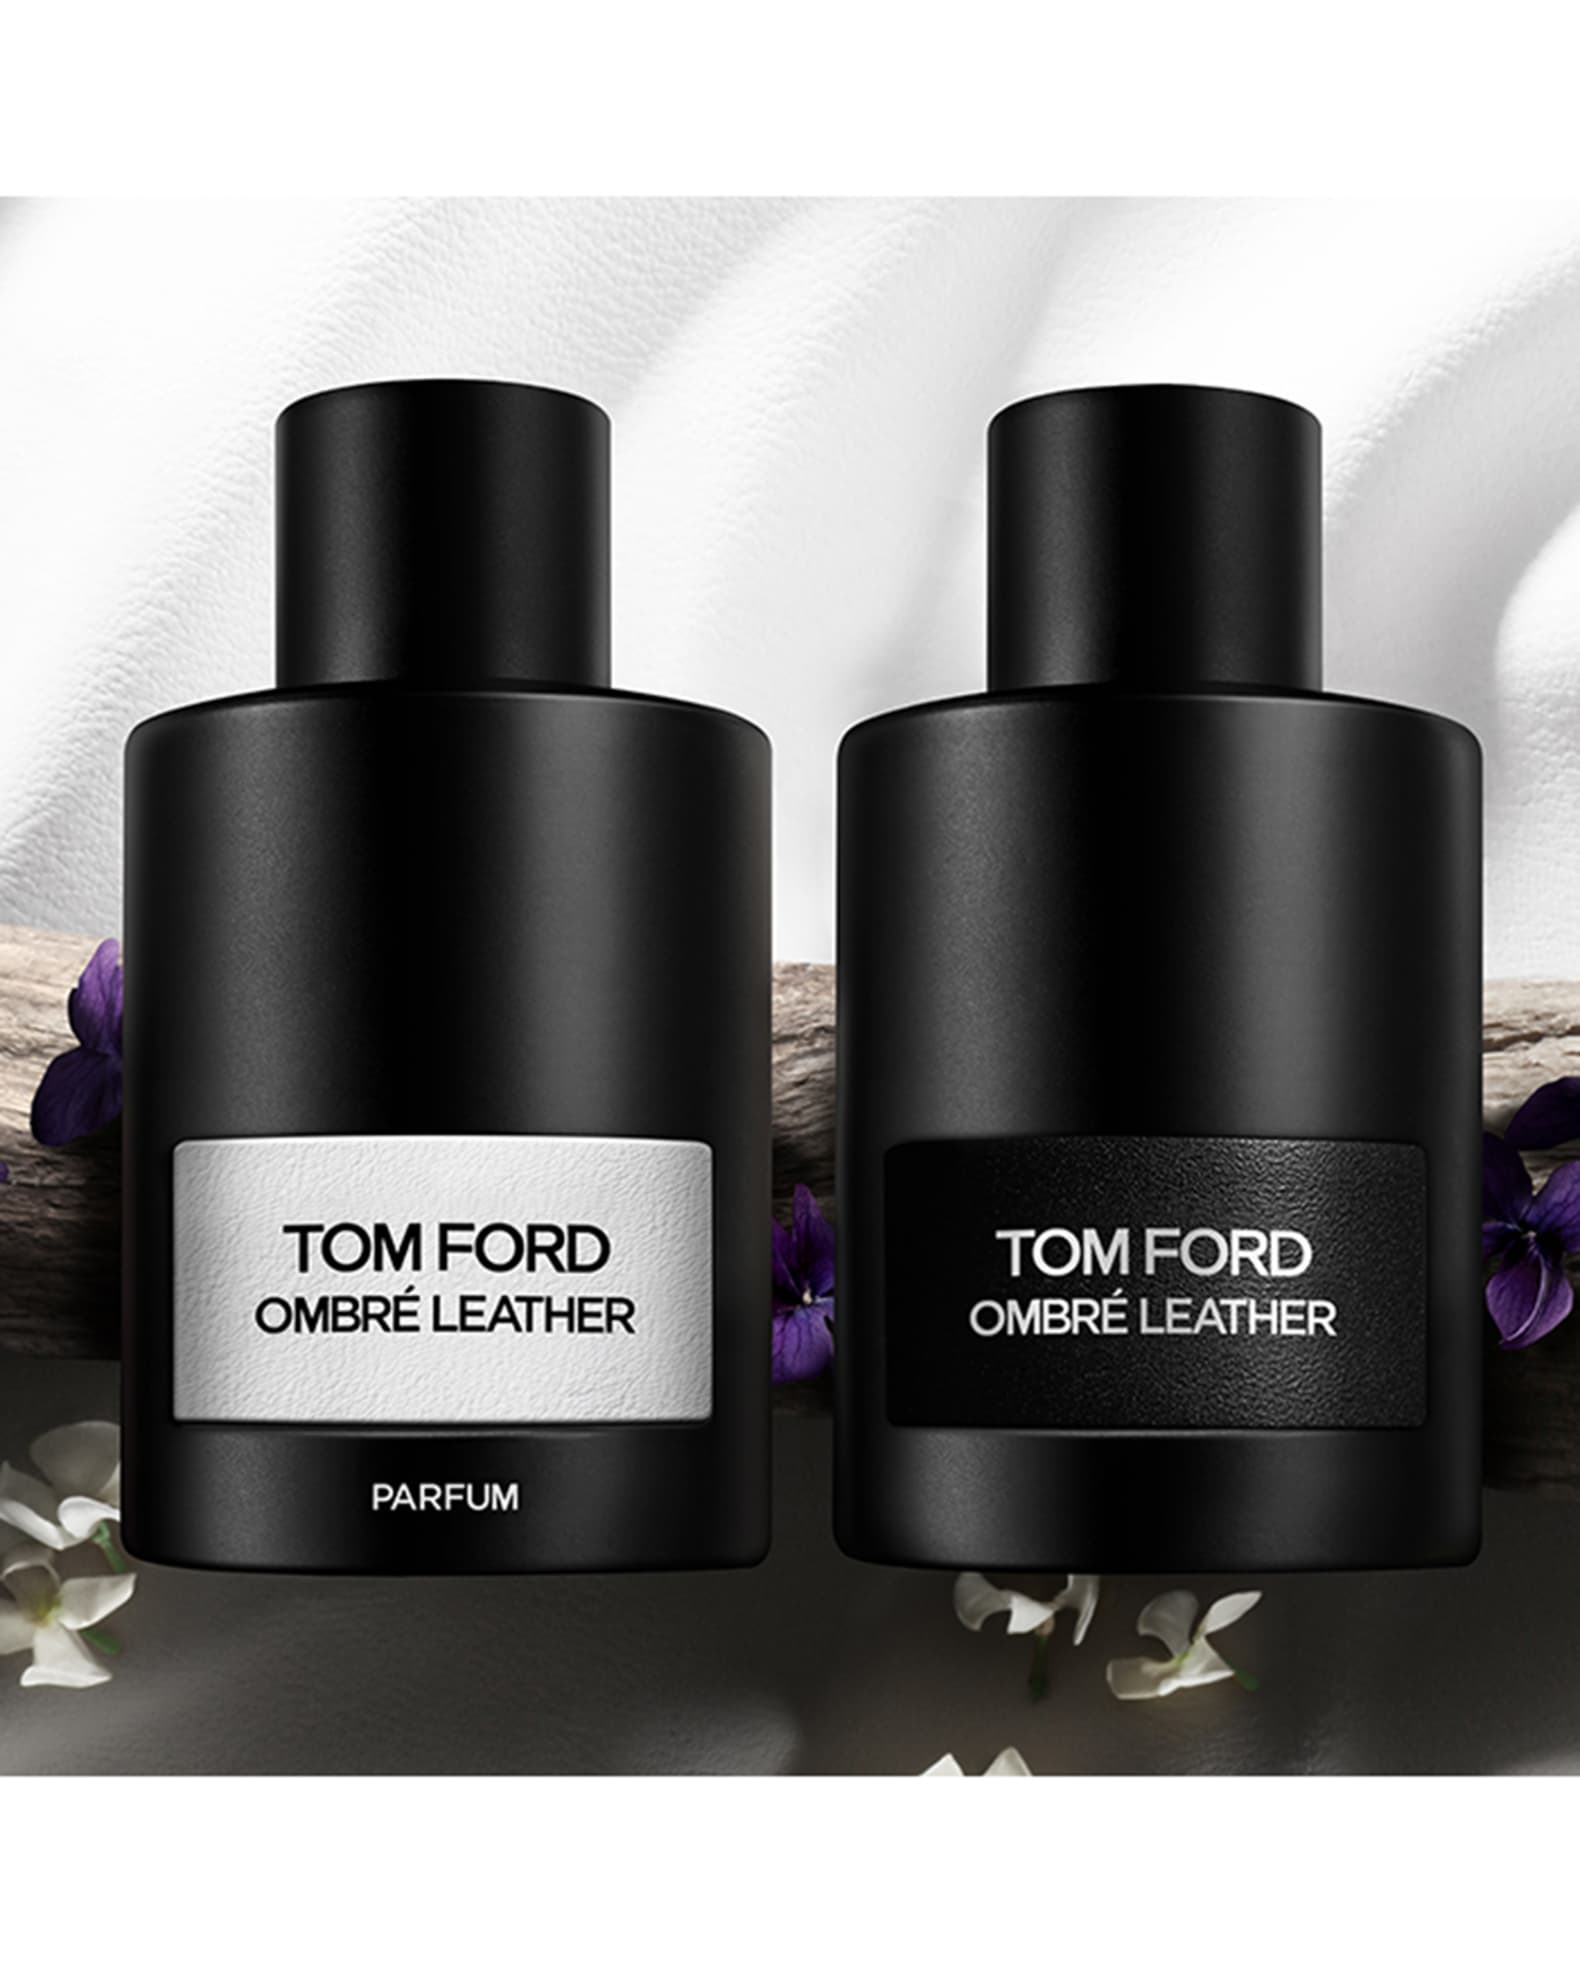 TOM FORD Ombre Leather Parfum, 3.4 oz. | Neiman Marcus